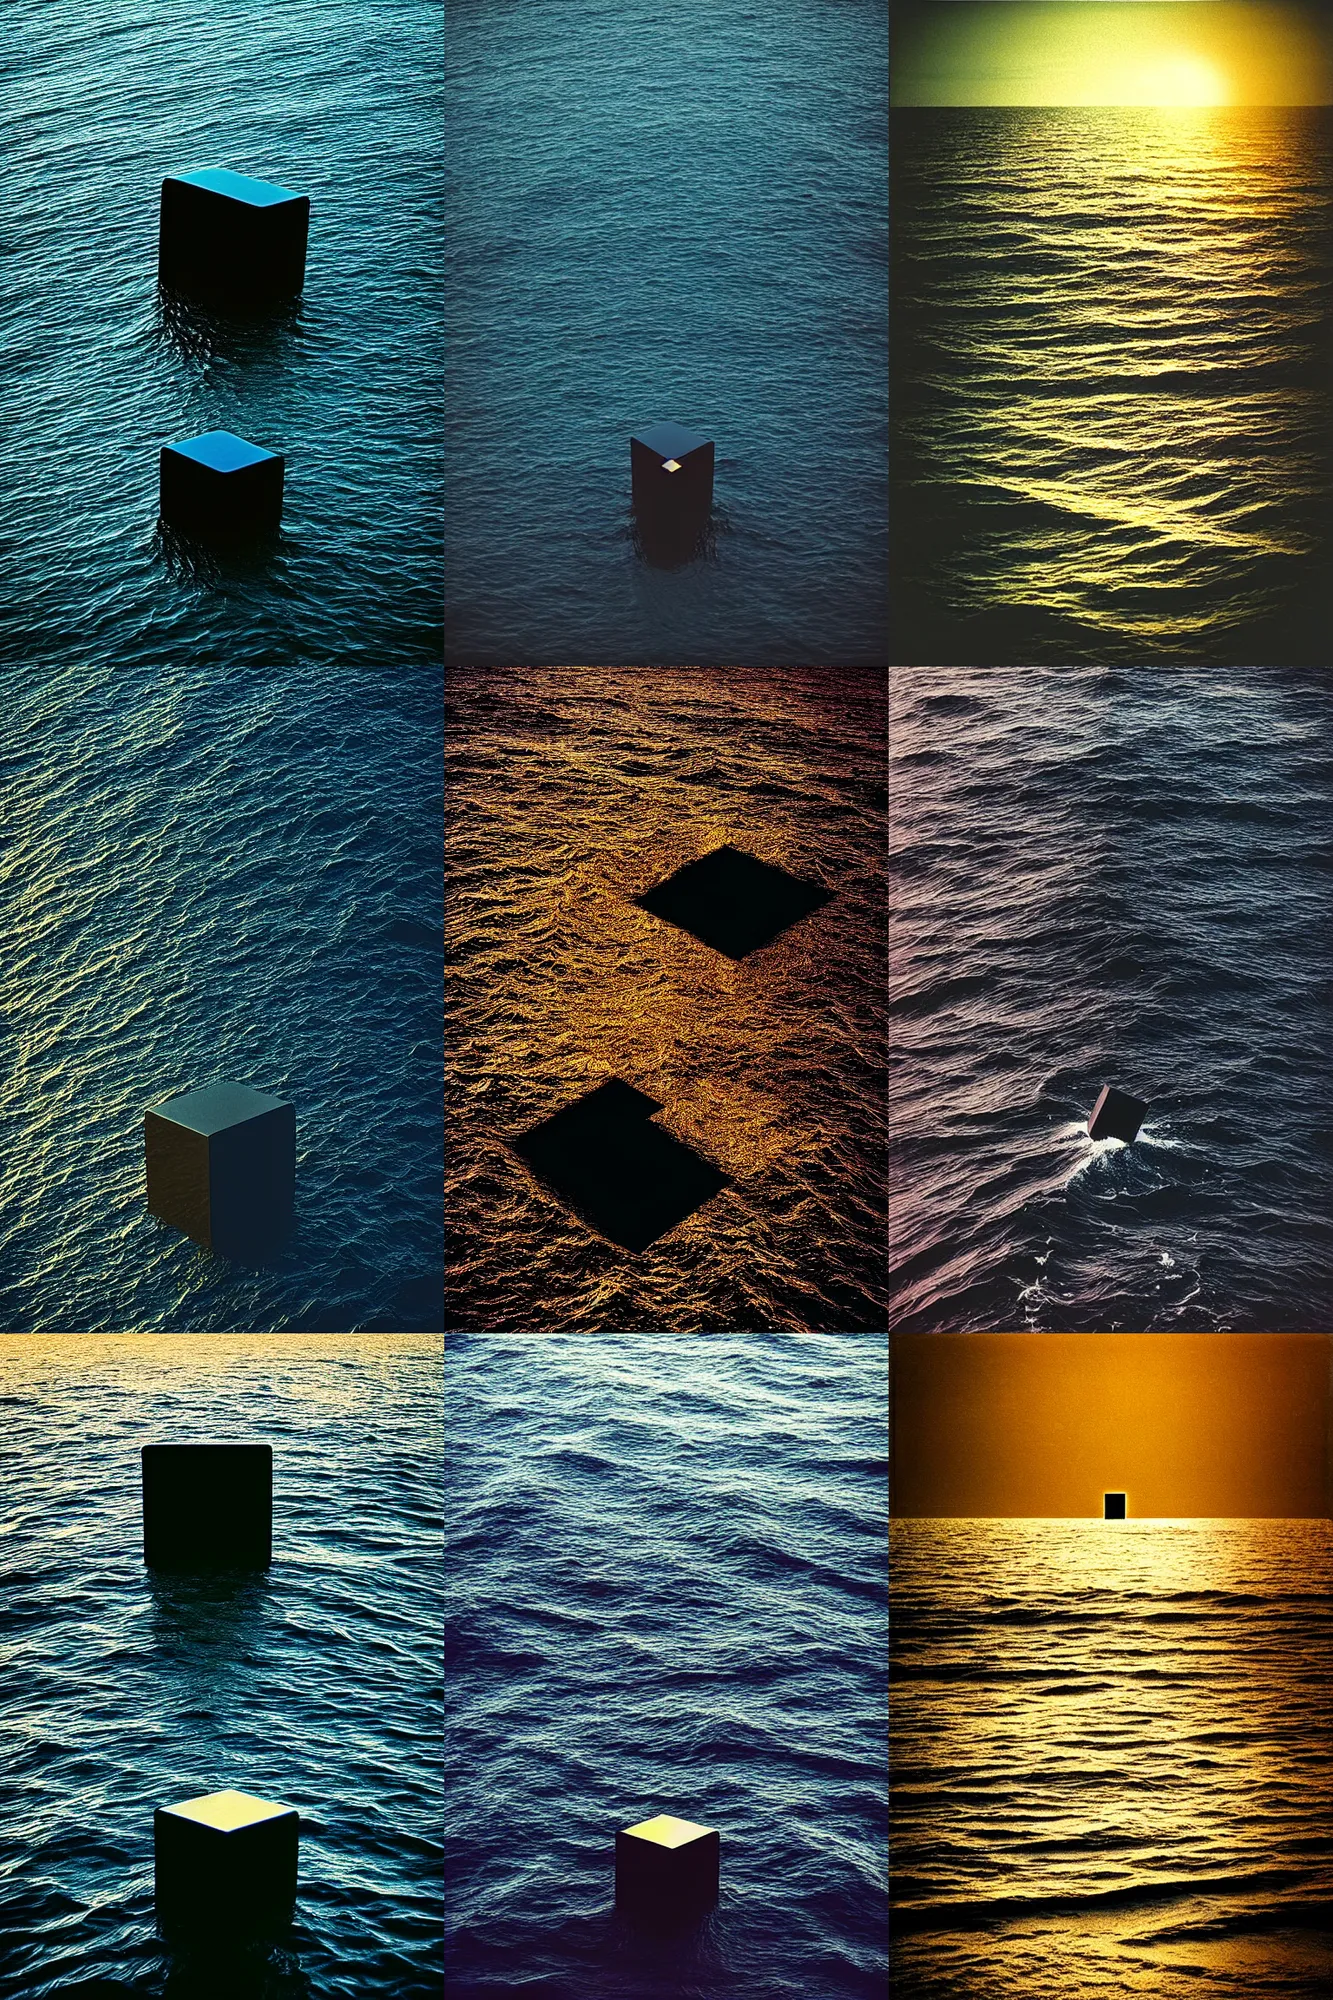 Prompt: “35mm photo of a black obsidian cube In the middle of a sea, in the style of Richard Serra. Ektachrome 400. Golden hour. Beautifully lit. Award winning.”